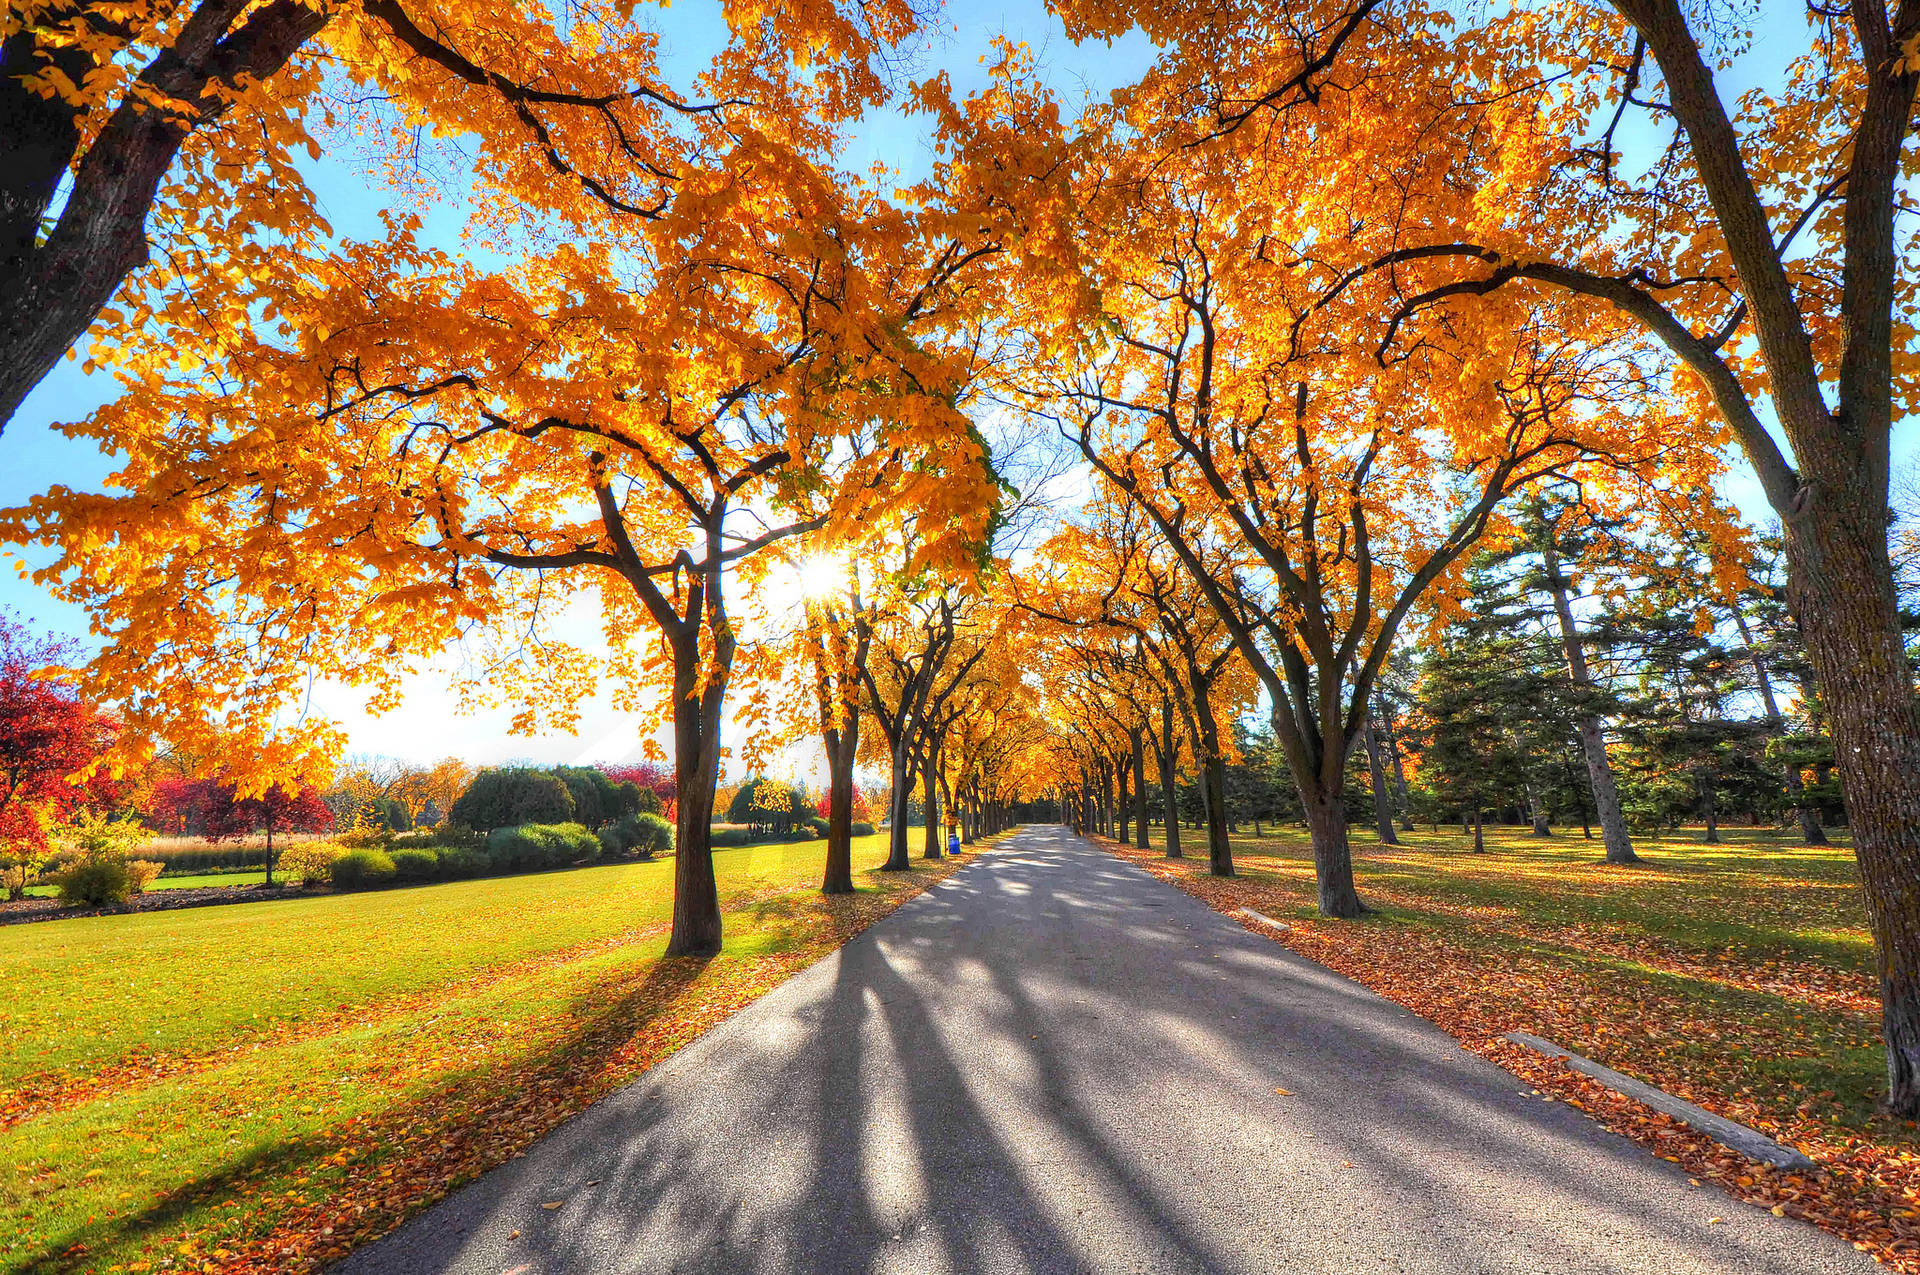 Big wide angle of trees with orange leaves on a bright sunny day in a park during autumn season.